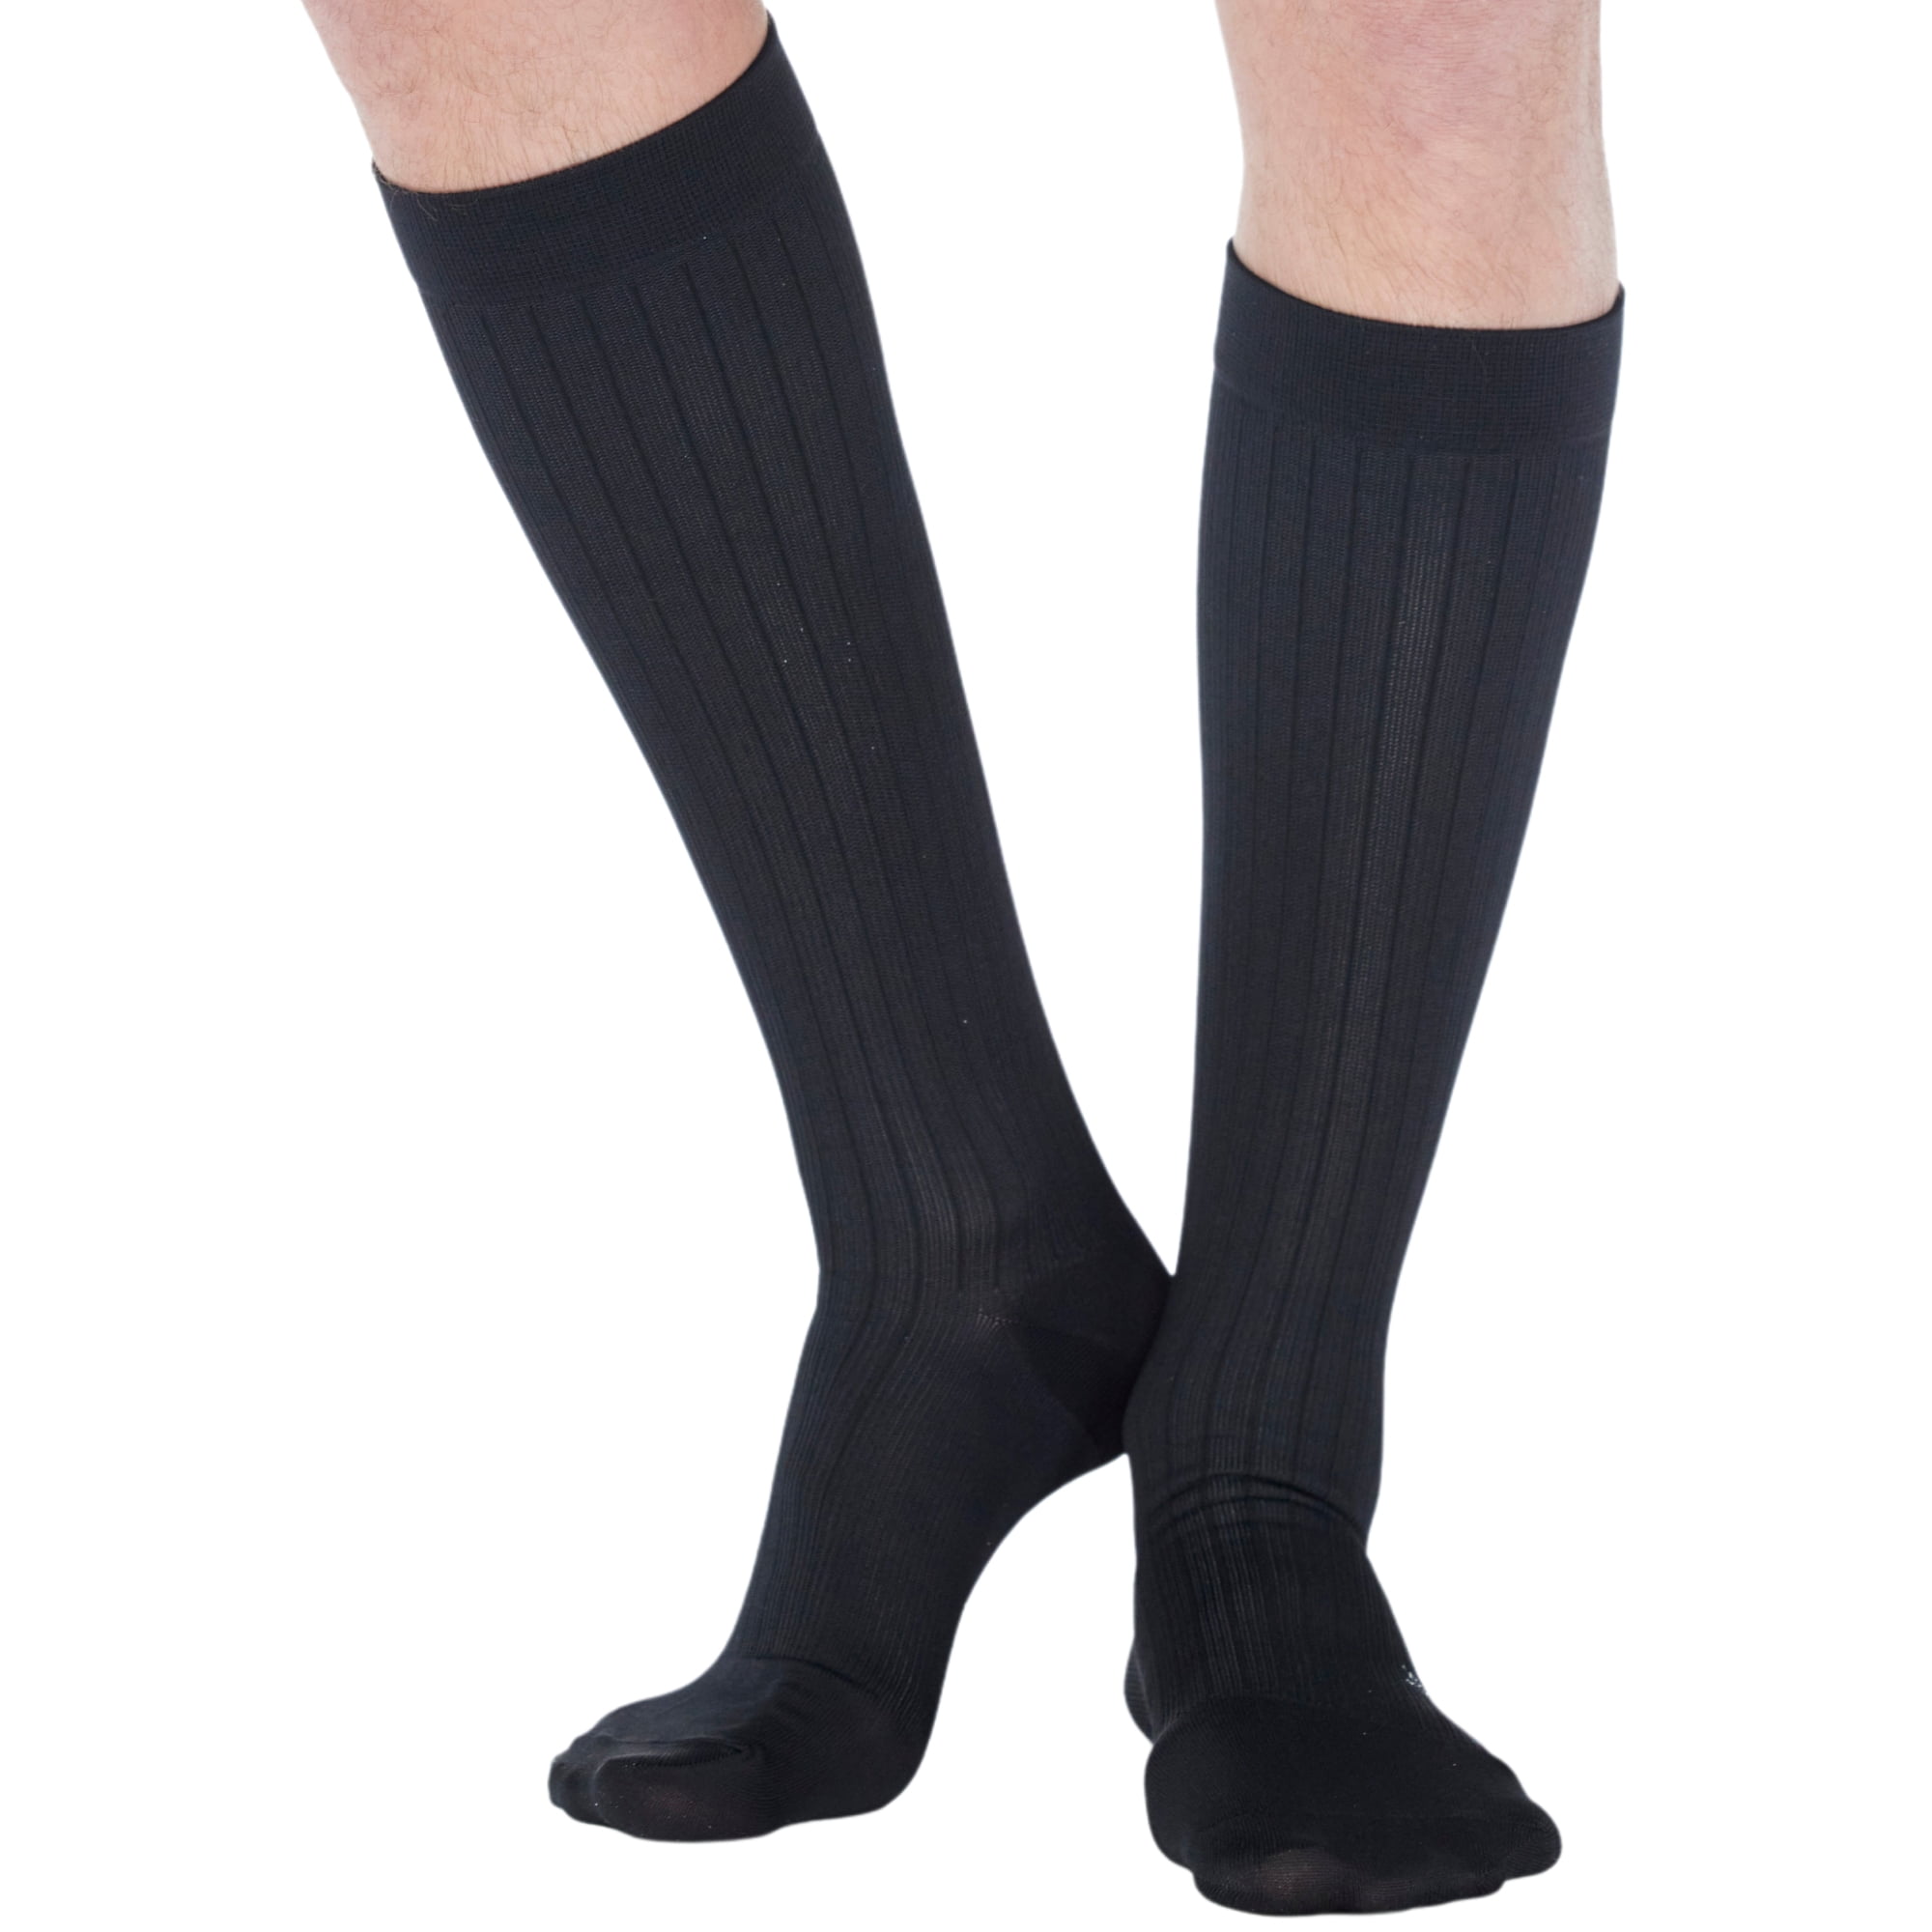 Made in USA - Compression Knee High for Men 15-20mmHg Swelling - Black ...